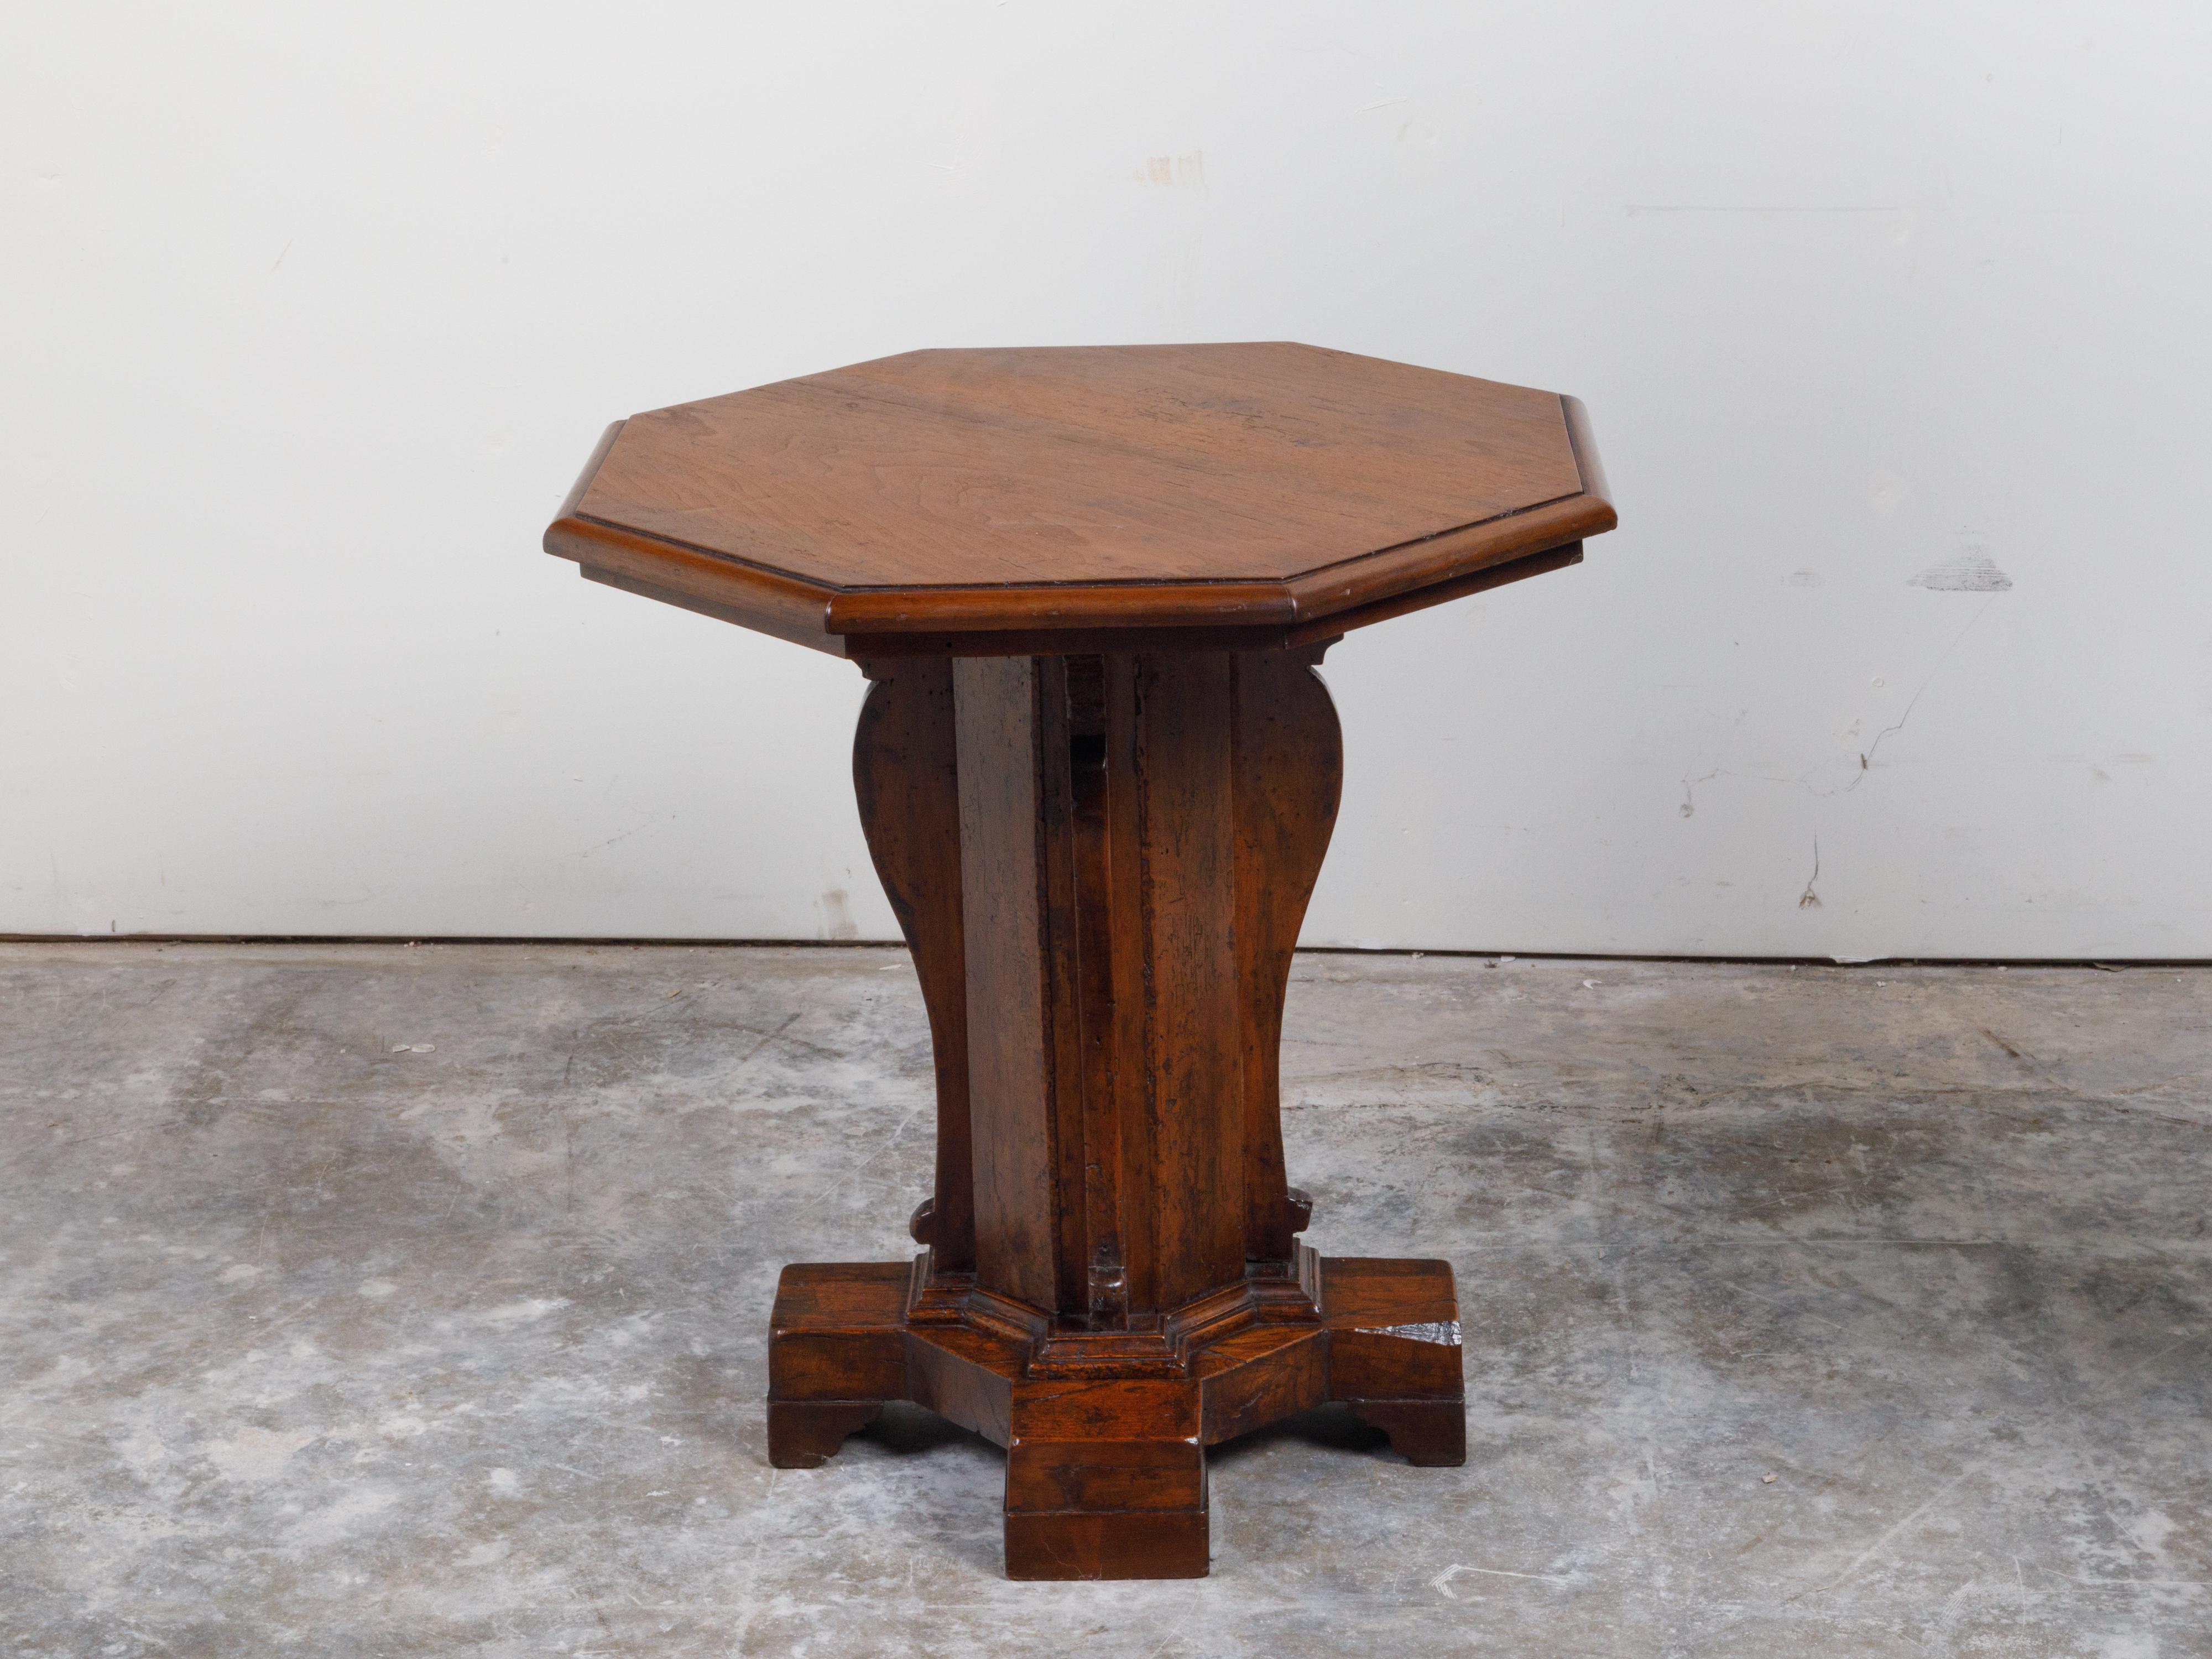 An Italian walnut side table from the 19th century, with octagonal top and pedestal base. Created in Italy during the 19th century, this walnut side table features an octagonal top sitting above a carved pedestal base accented with scrolling